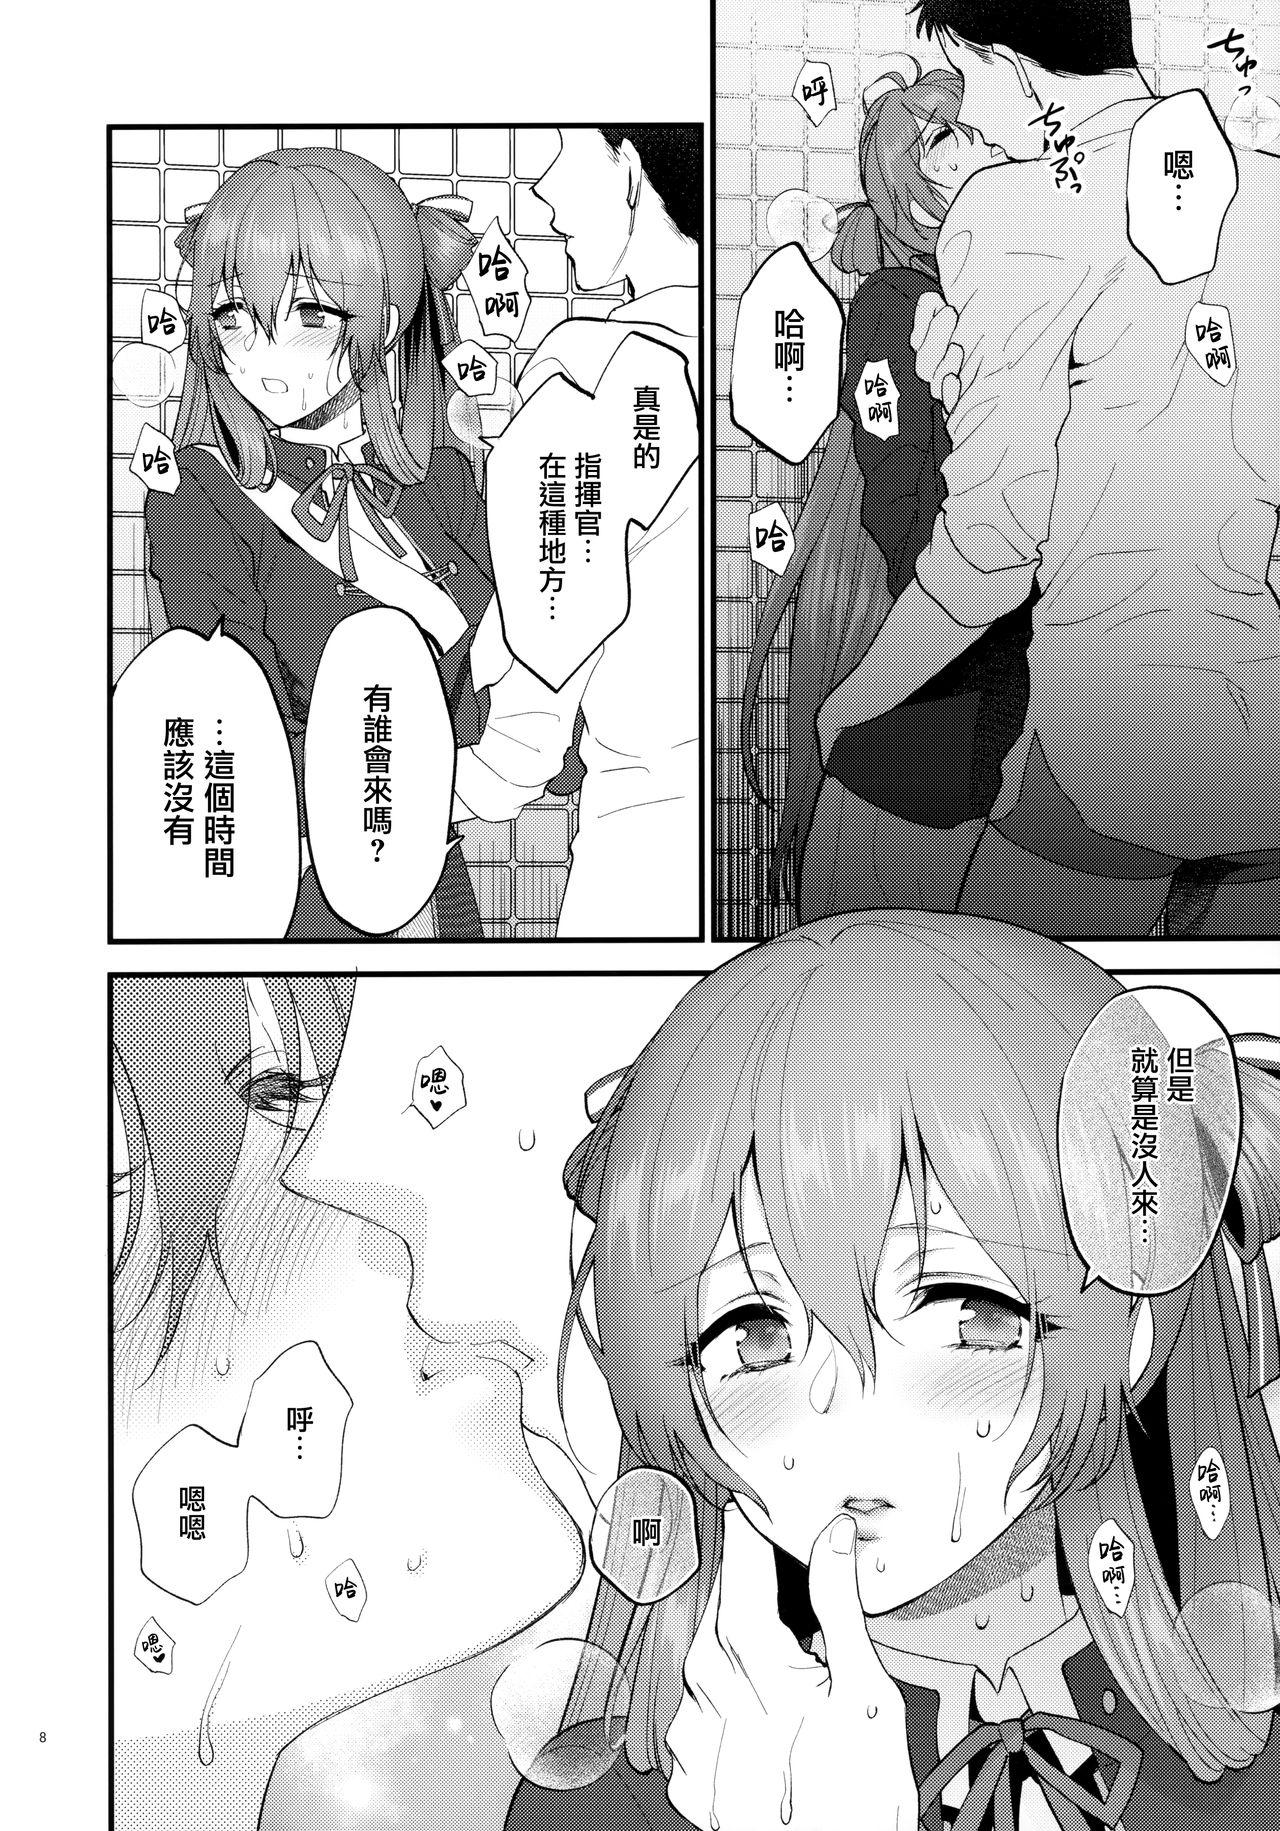 African Shower Room - Girls frontline Stream - Page 7